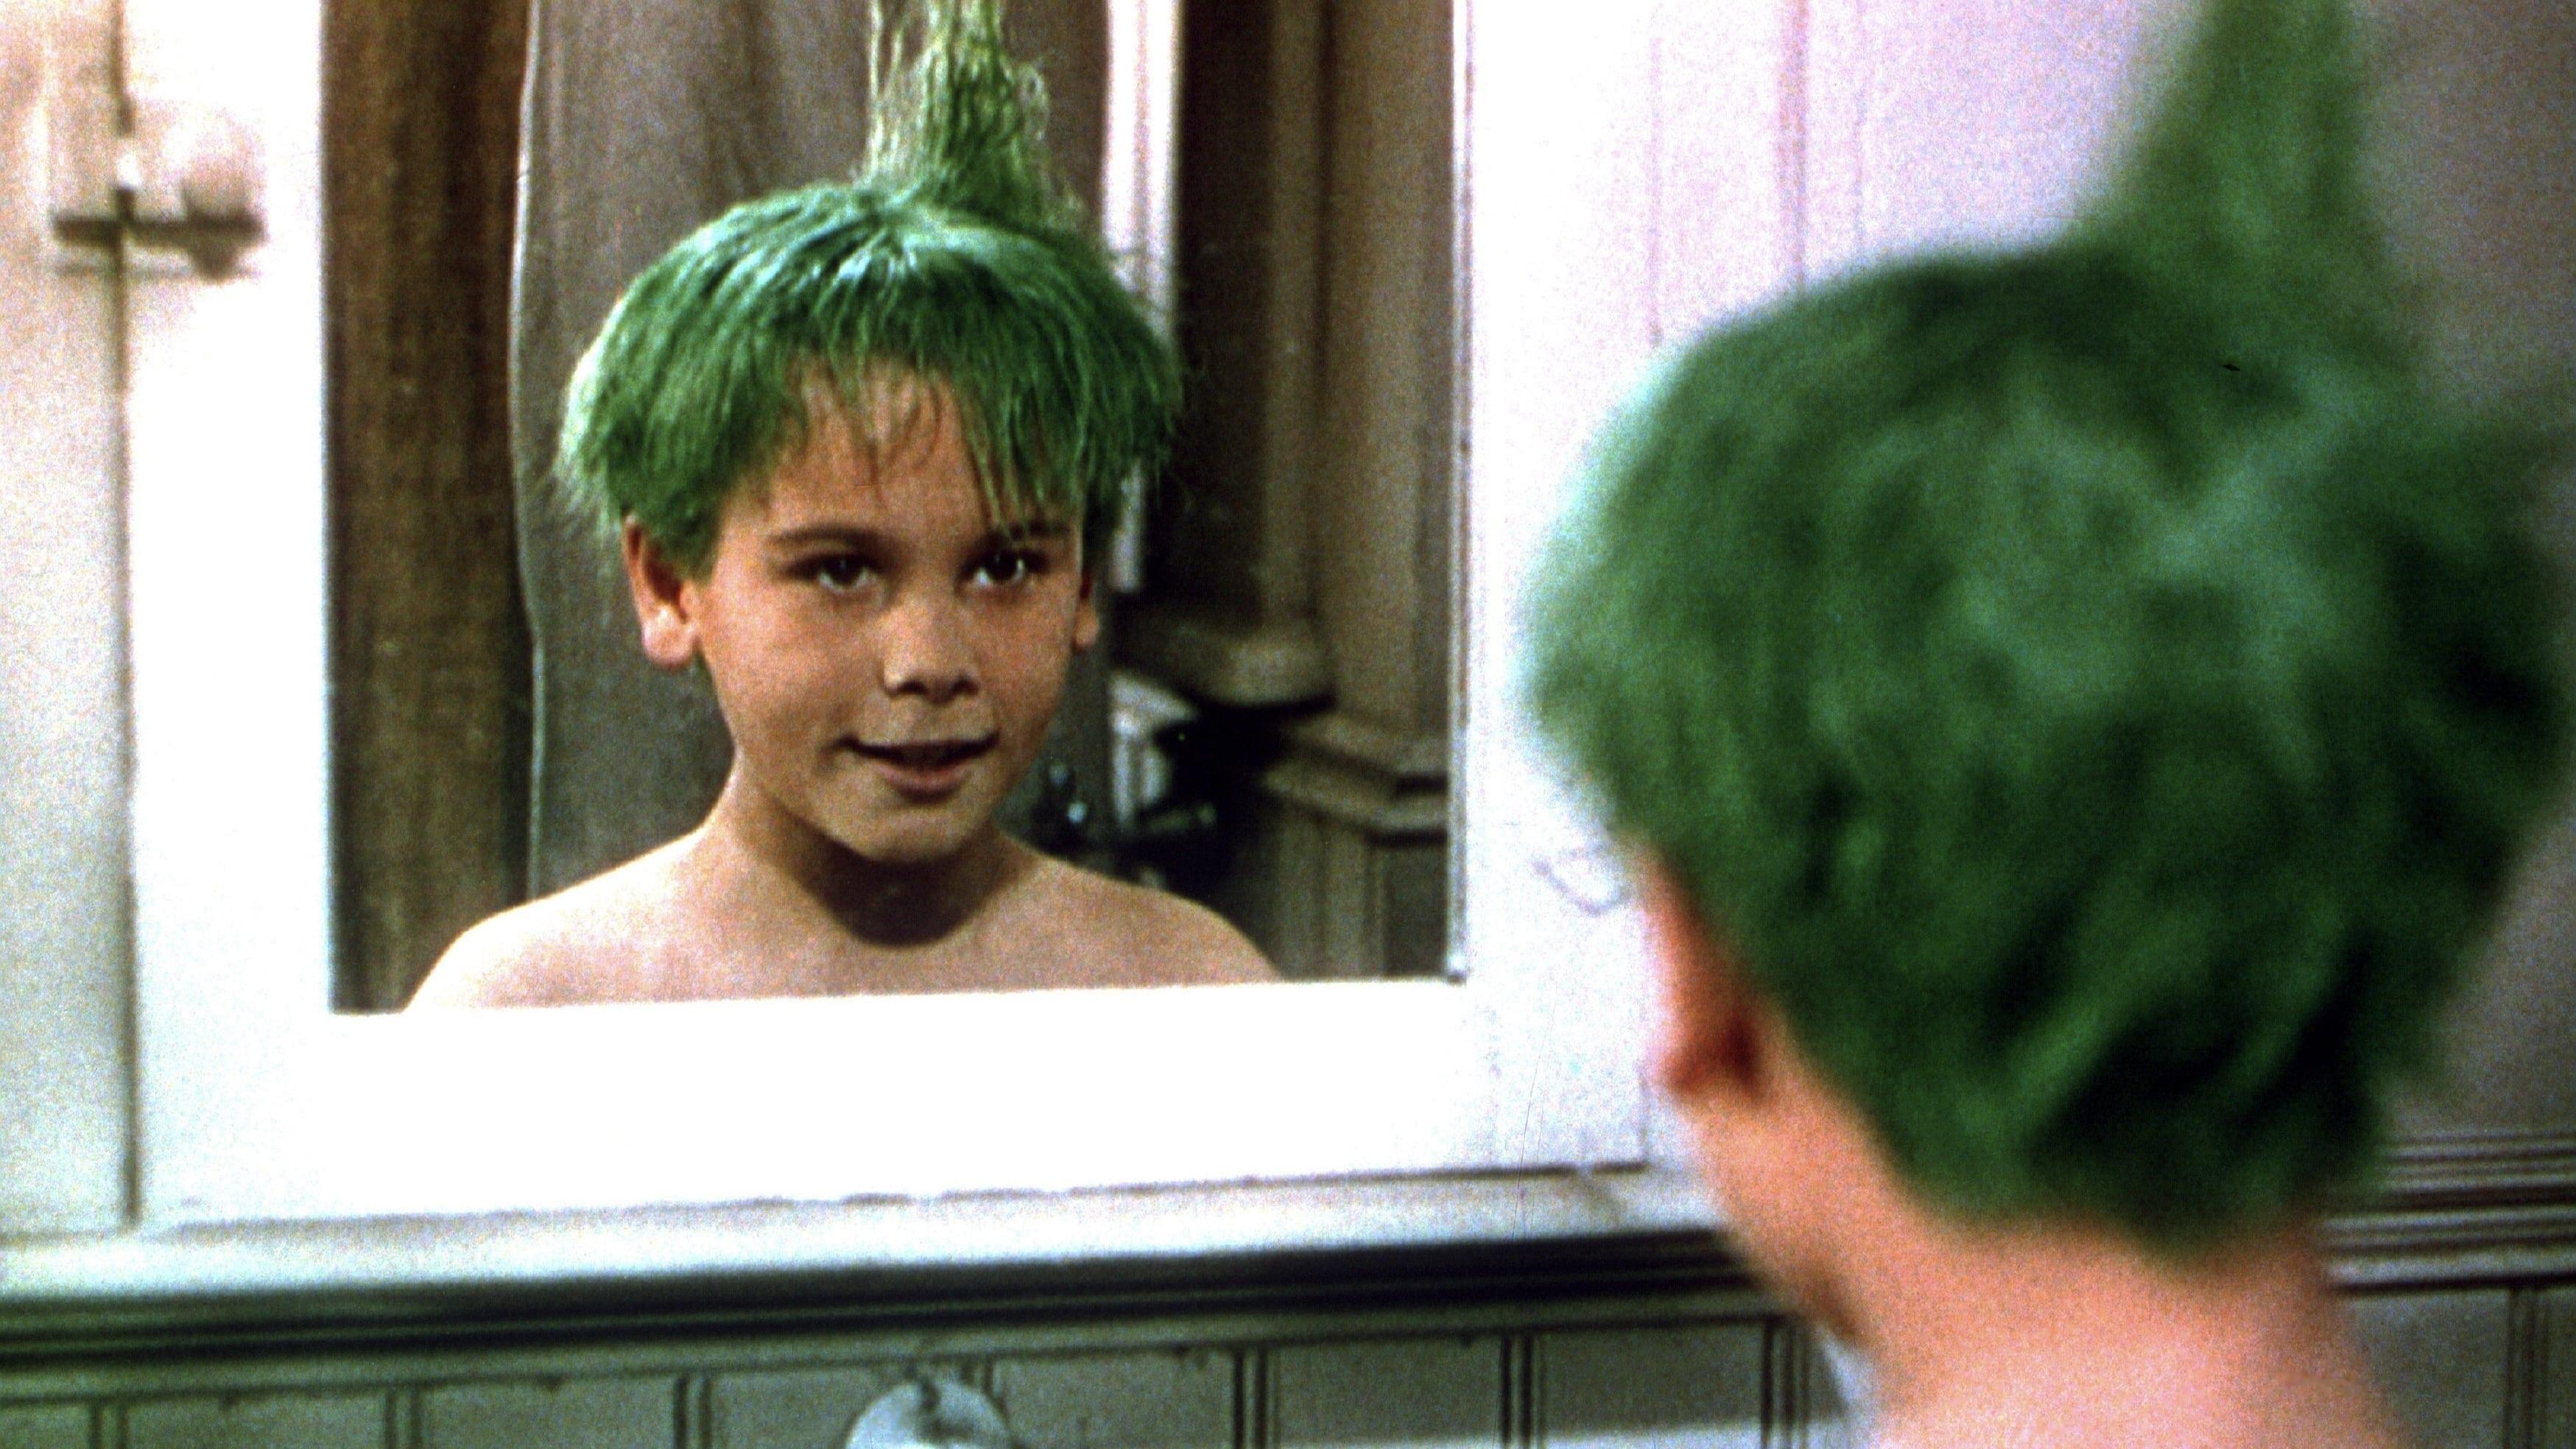 The Boy with Green Hair backdrop